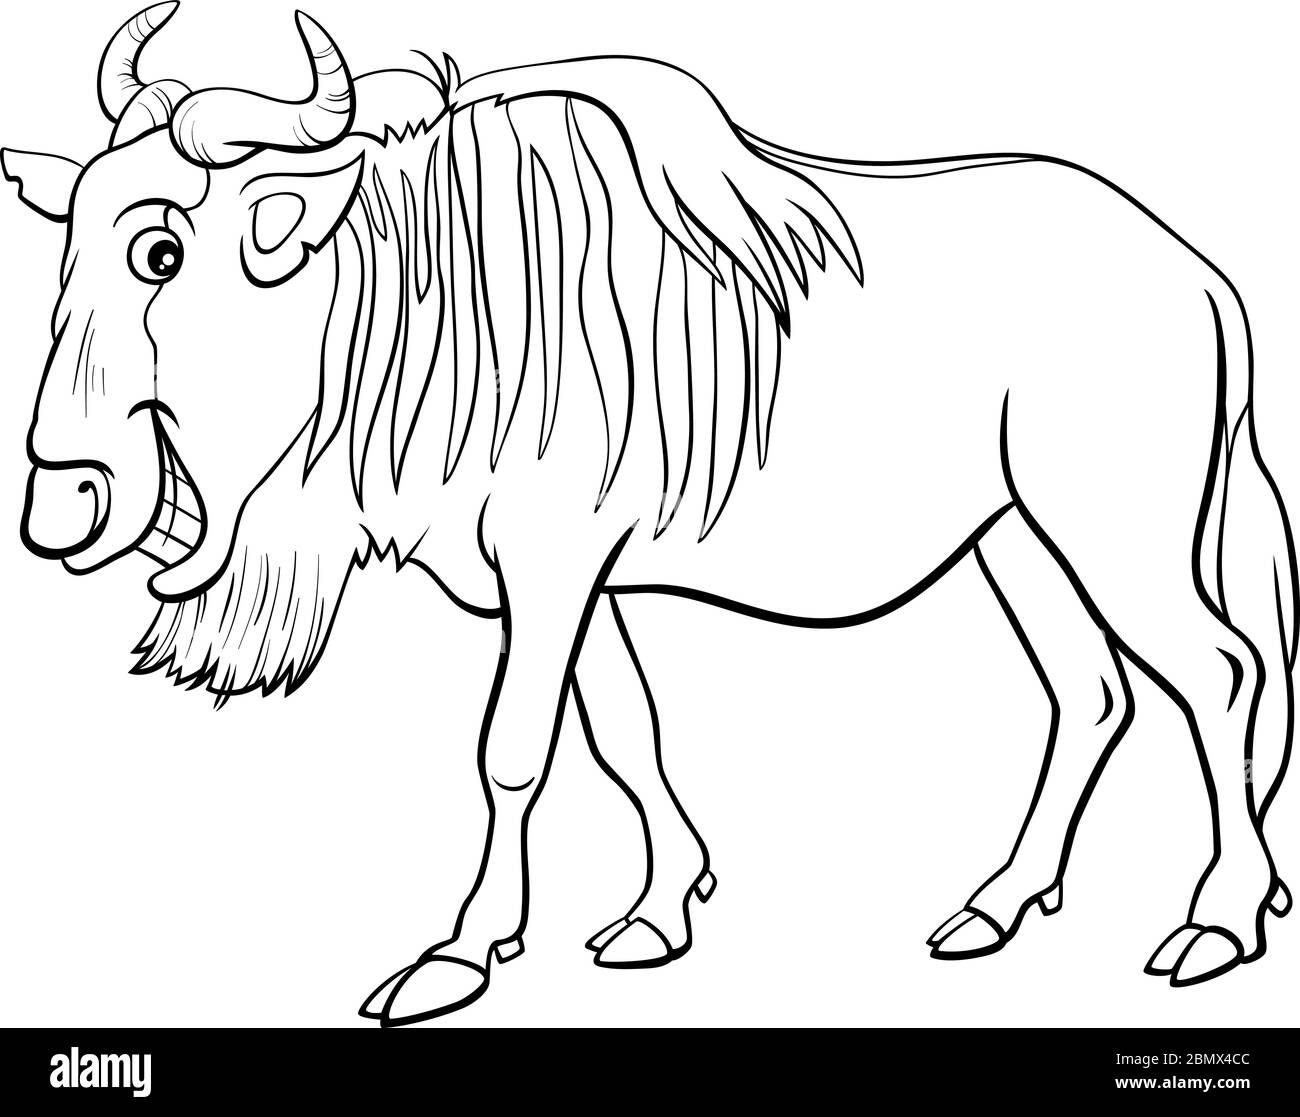 Black and White Cartoon Illustration of Gnu Antelope or Blue Wildebeest African Wild Animal Character Coloring Book Page Stock Vector